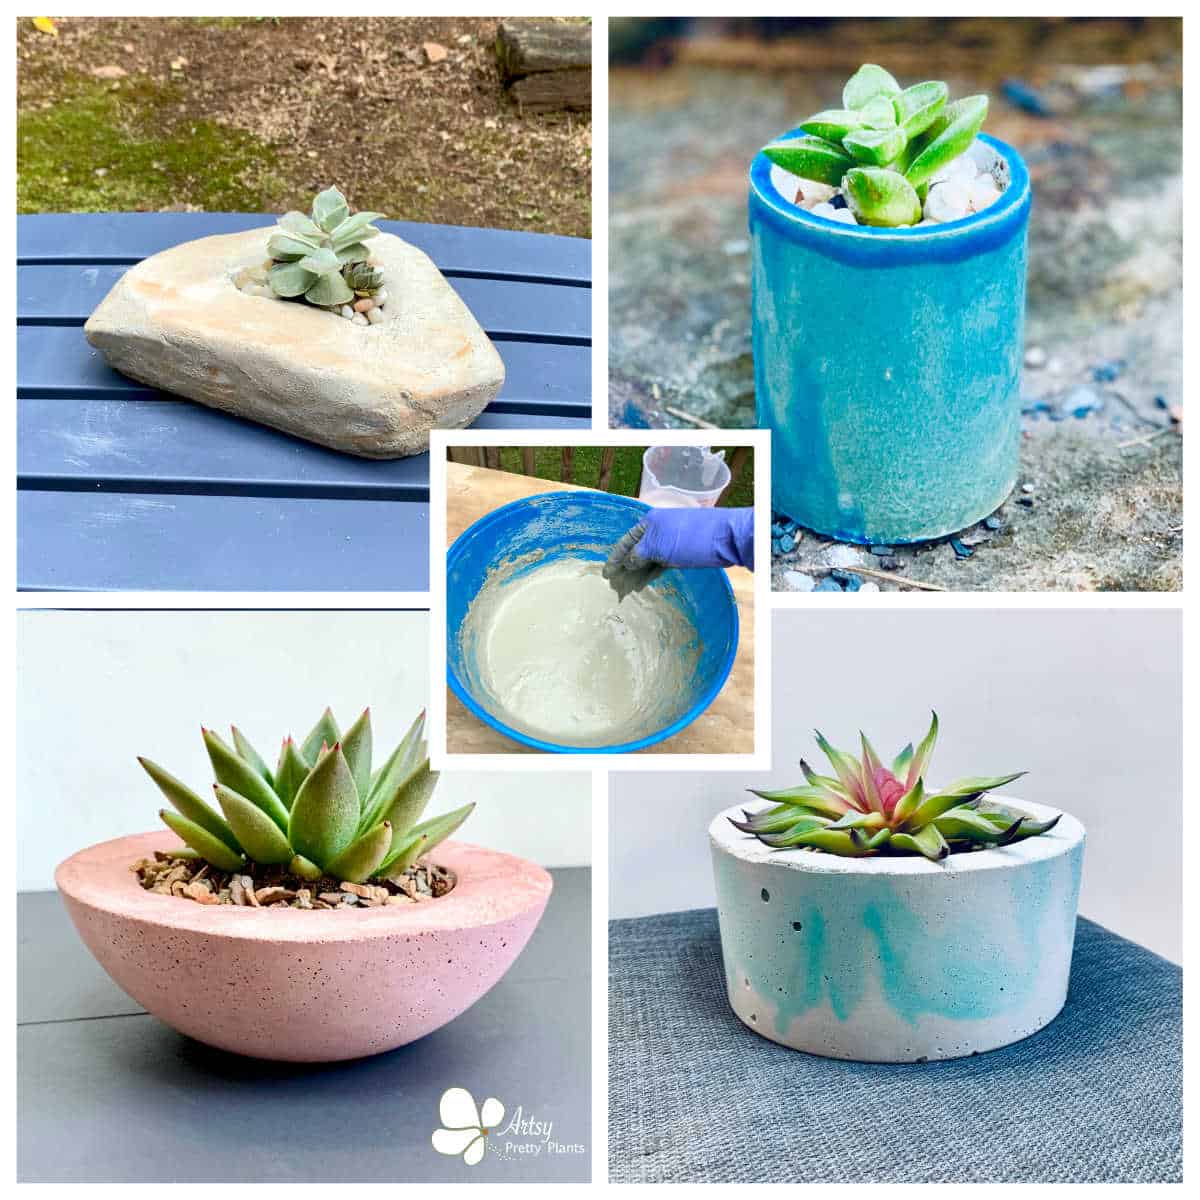 How To Make Concrete Planters: The Ultimate Guide!